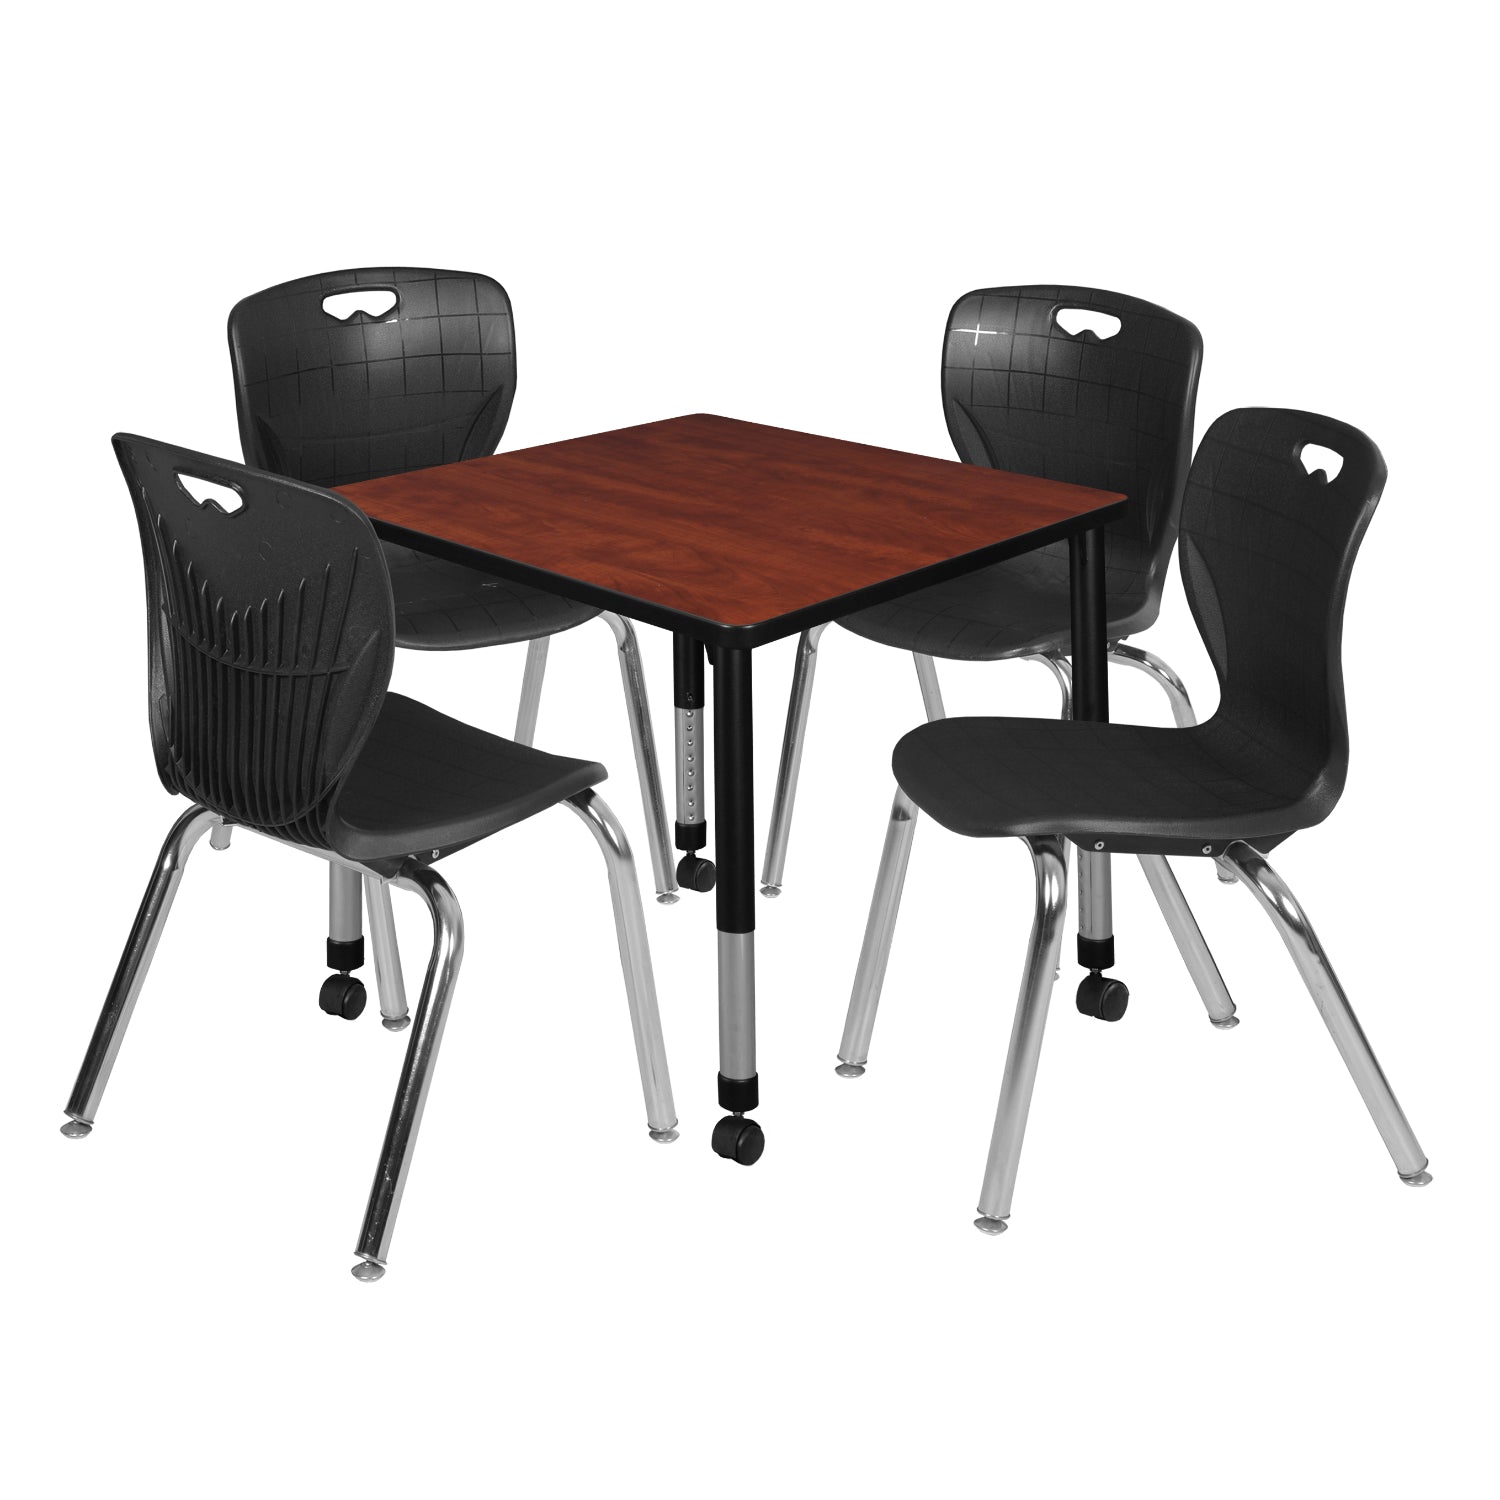 Kee Classroom Table and Chair Package, Kee 30" Square Mobile Adjustable Height Table with 4 Andy 18" Stack Chairs